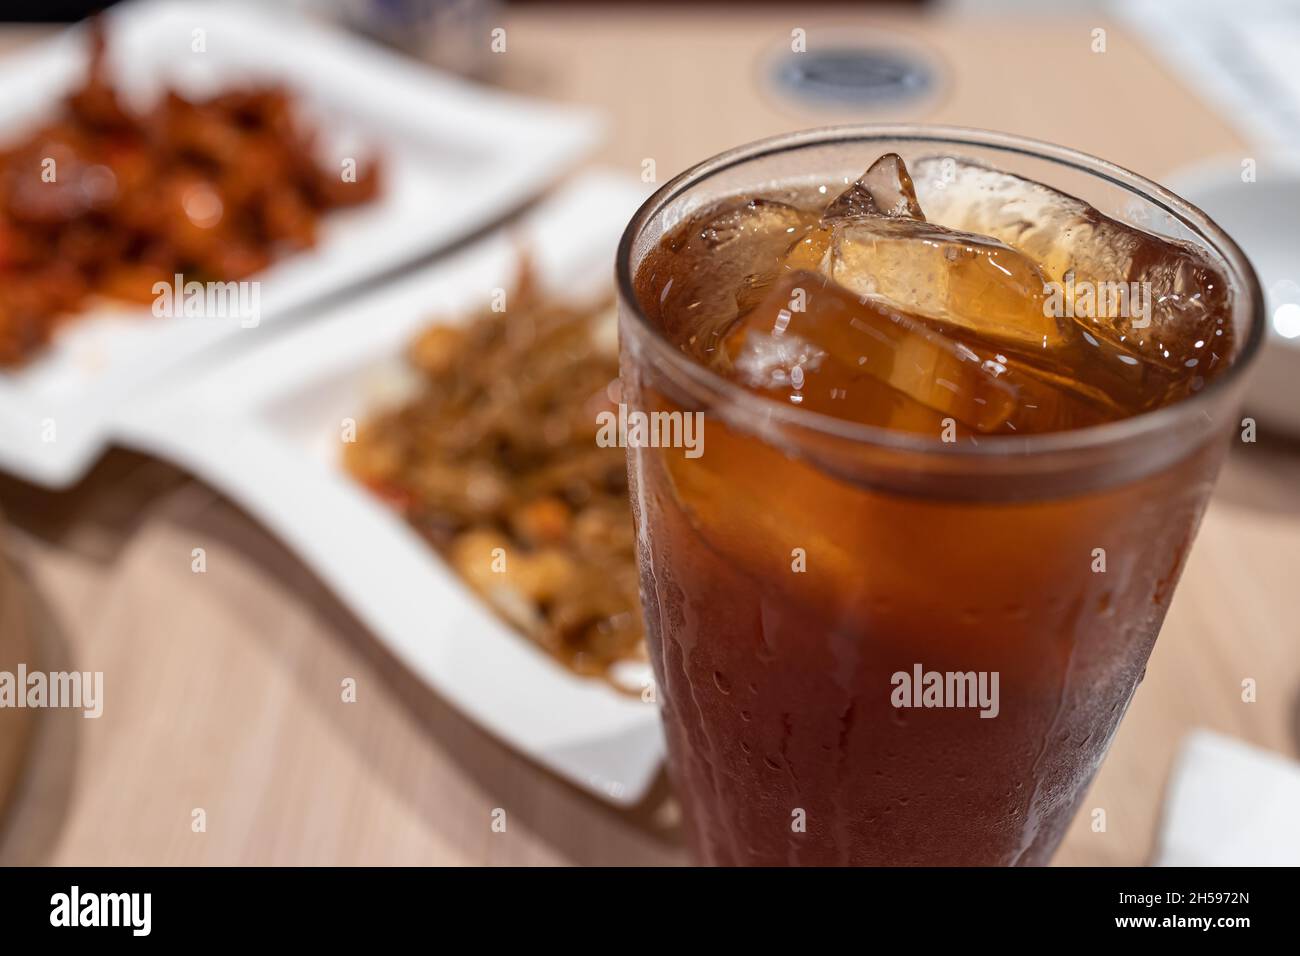 Iced tea with Chinese food at Restaurant Stock Photo